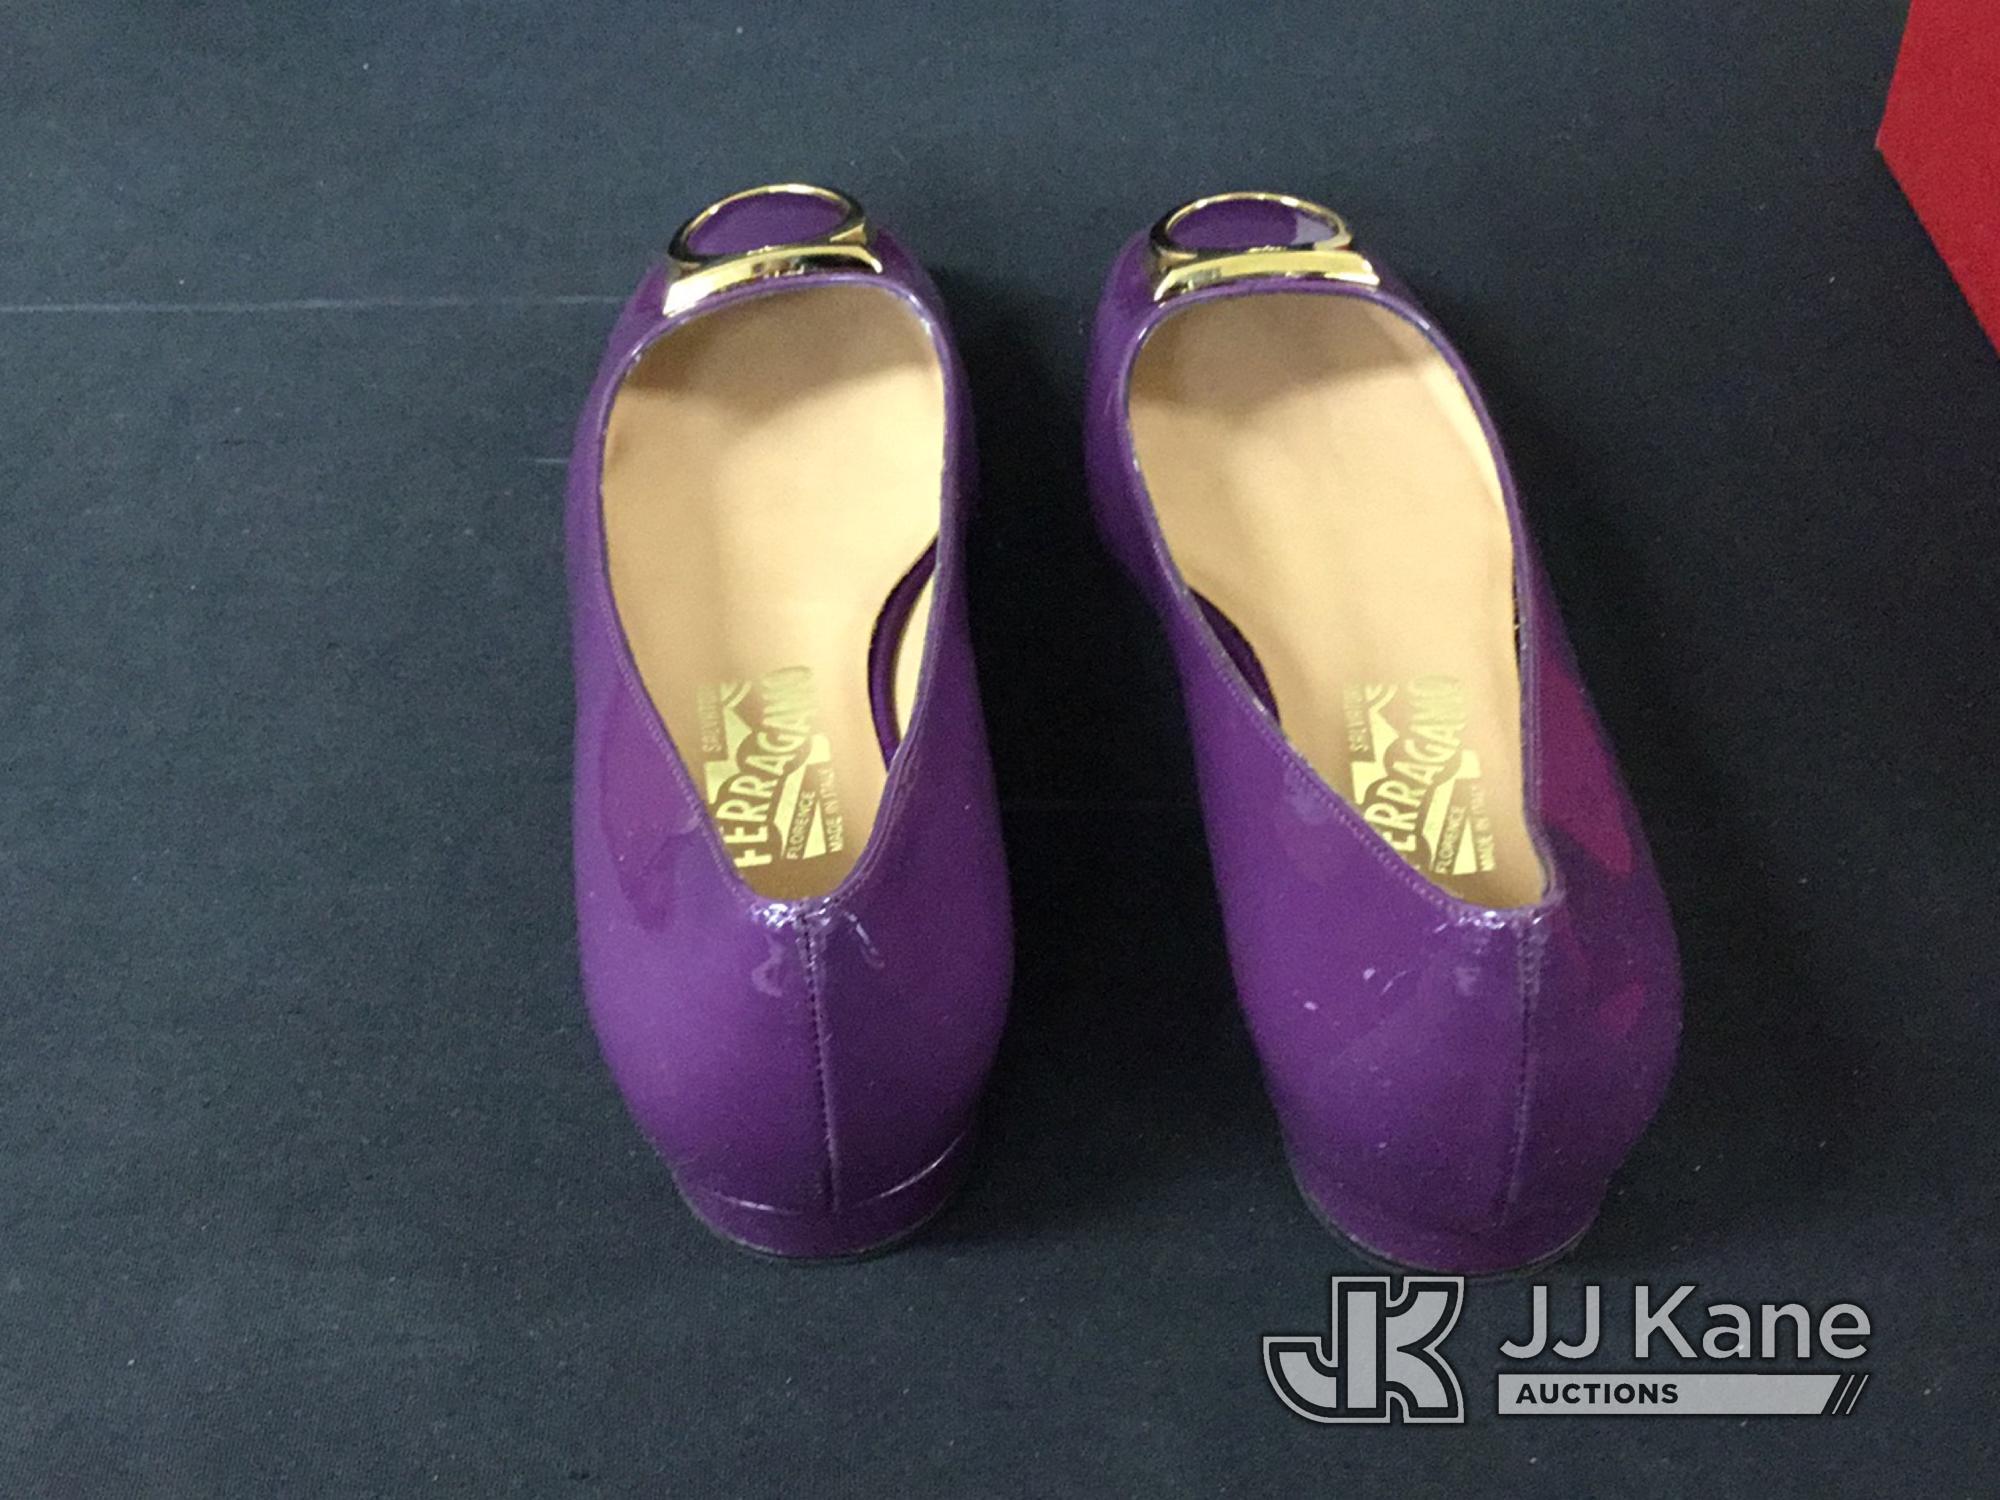 (Jurupa Valley, CA) Shoes | authenticity unknown (Used) NOTE: This unit is being sold AS IS/WHERE IS